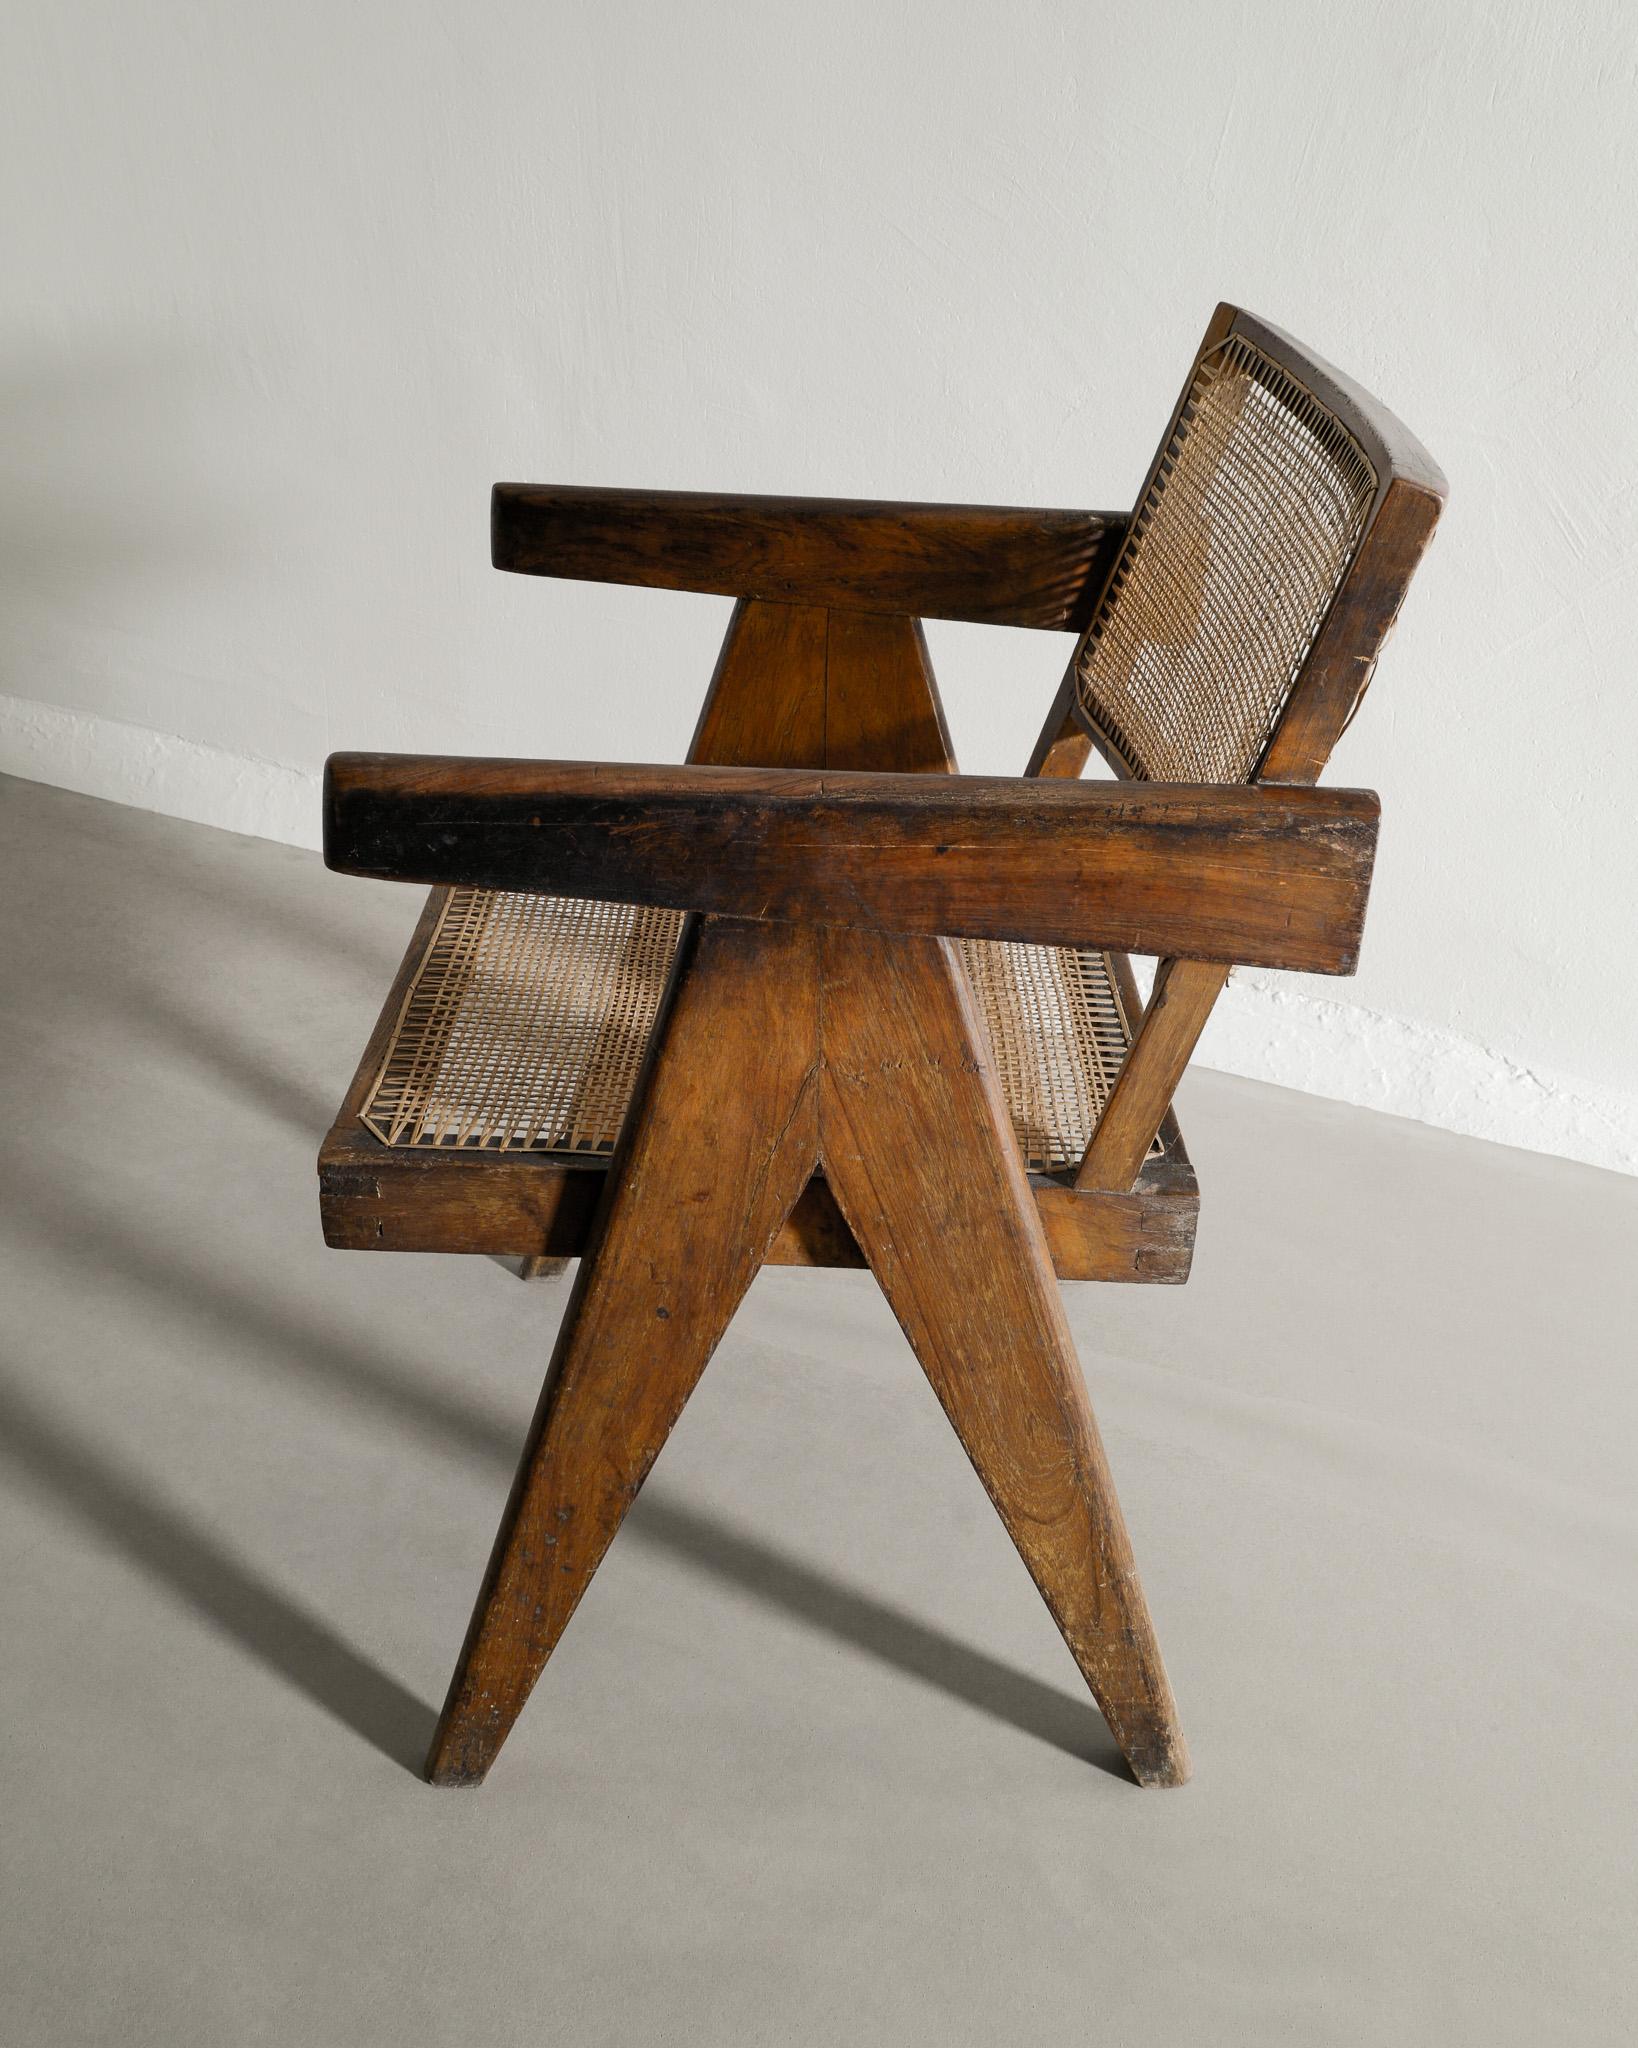 Mid-20th Century Pierre Jeanneret Mid Century Wooden Office Chair in Teak & Rattan Produced 1950s For Sale